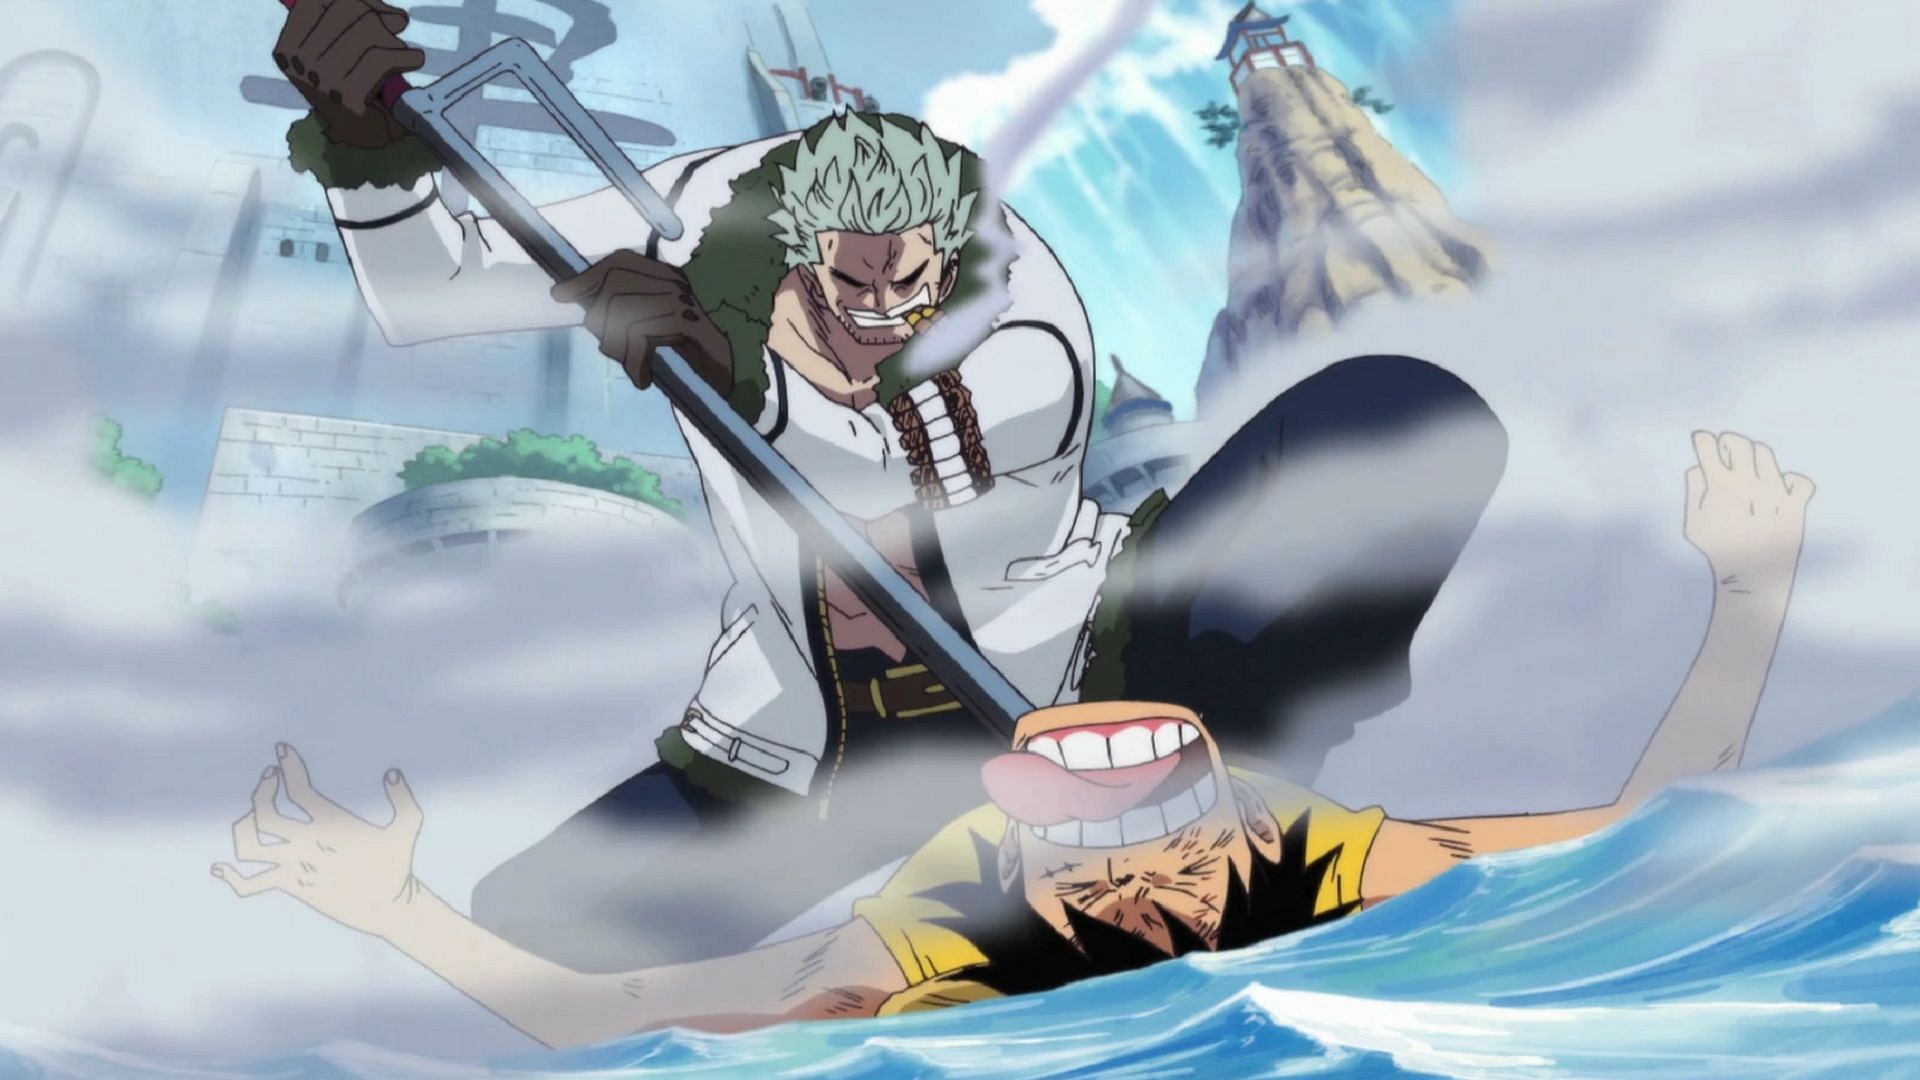 In the first half of the story, Smoker frequently beat Luffy, but also started to respect him, seeing him more as an individual than a pirate (Image via Toei Animation, One Piece)